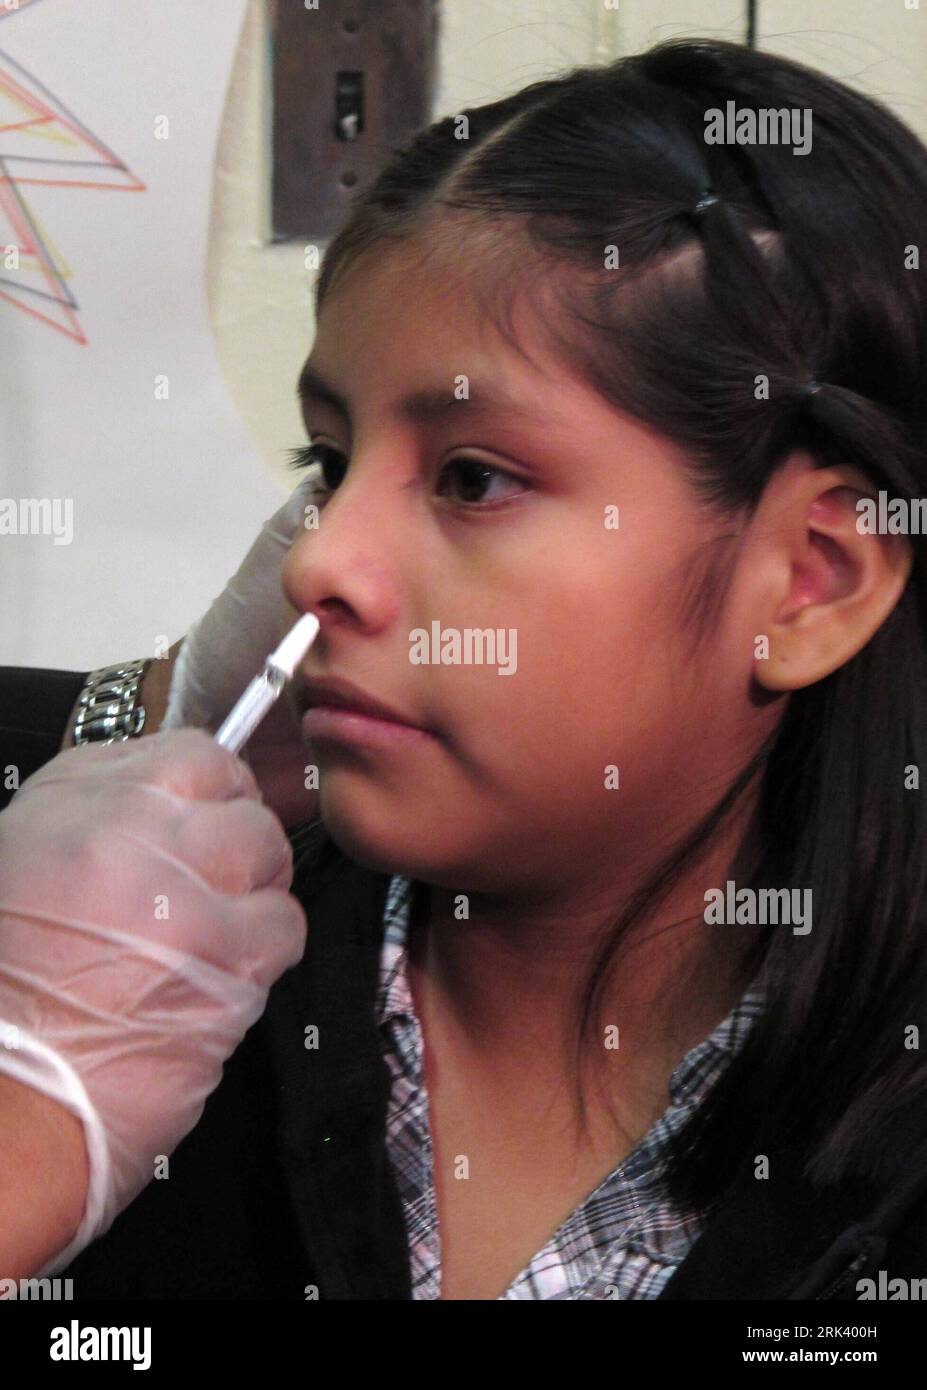 Bildnummer: 53560912  Datum: 28.10.2009  Copyright: imago/Xinhua (091028) -- NEW YORK, Oct. 28, 2009 (Xinhua) -- A student prepares to receive a free H1N1 flu vaccine at the 157 Public Elementary School in New York, the United States, Oct. 28, 2009. New York City began its school-based H1N1 influenza vaccination campaign on Wednesday. The first phase of the three-stage initiative started at 125 schools with enrollment of less than 400. (Xinhua/Liu Xin) (4)US-NEW YORK-H1N1 FLU VACCIN PUBLICATIONxNOTxINxCHN Gesellschaft Impfung Impfstoff Schweinegrippe H1N1 Gesundheit Kbdig xdp 2009 hoch premium Stock Photo